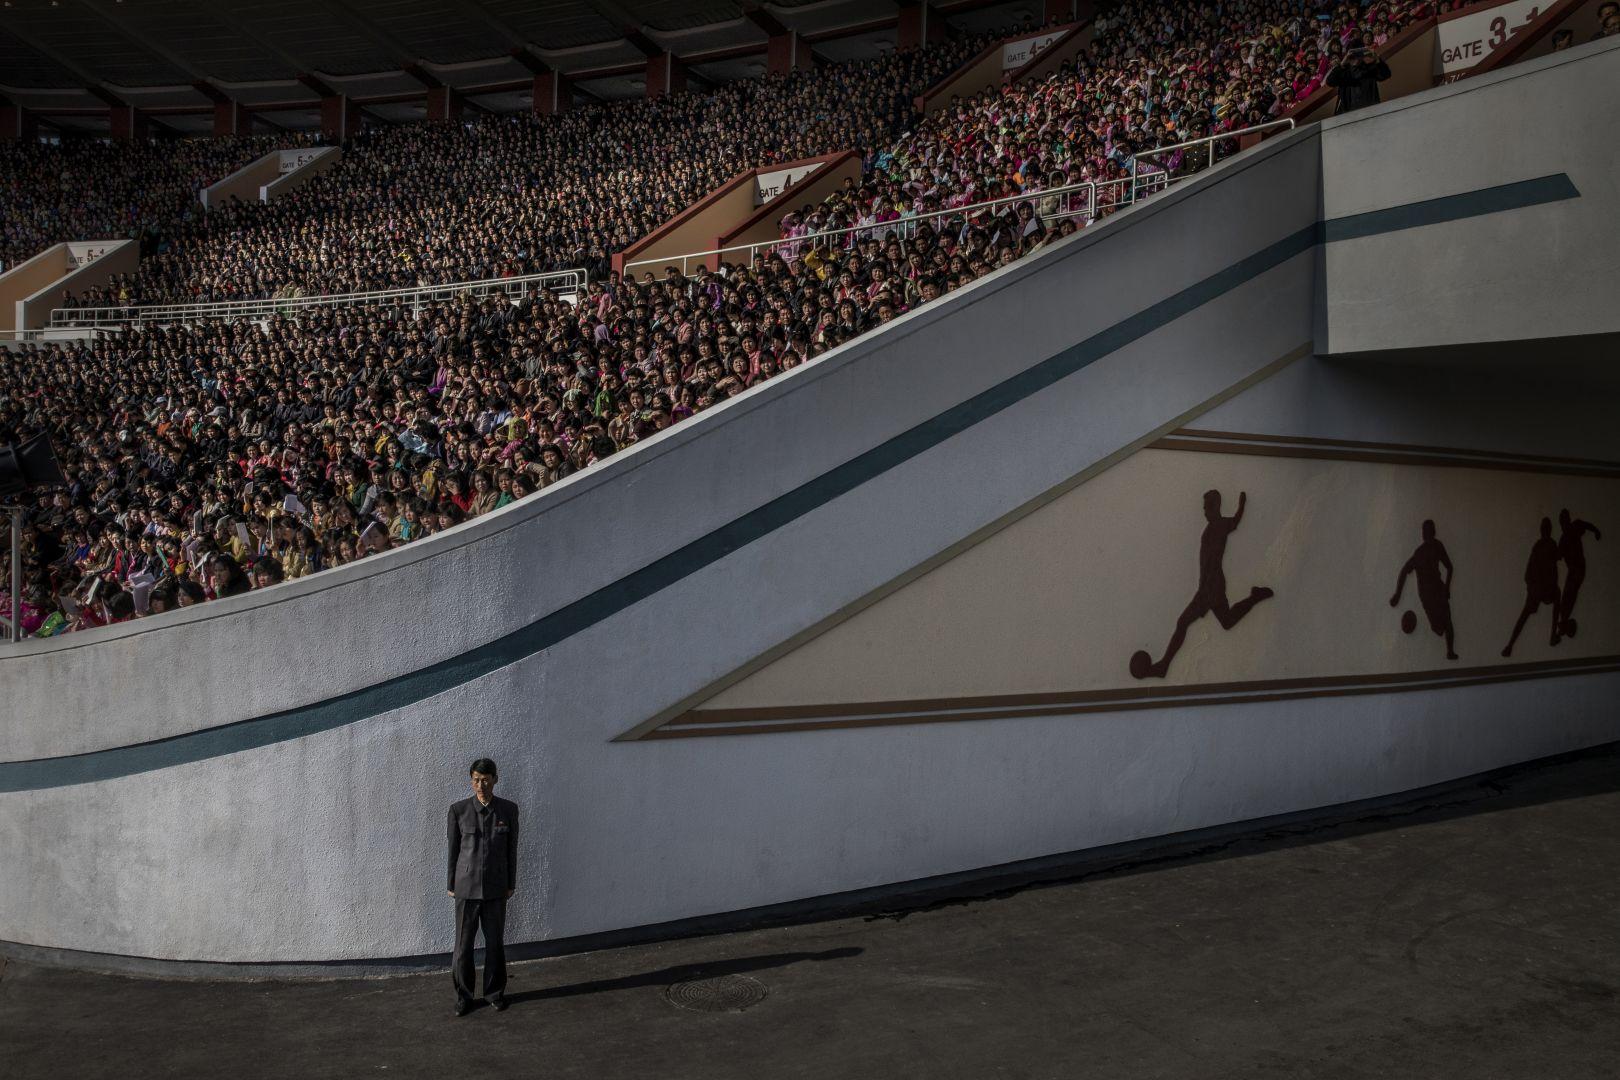 © Roger Turesson, 3rd prize singles, World Press Photo Contest